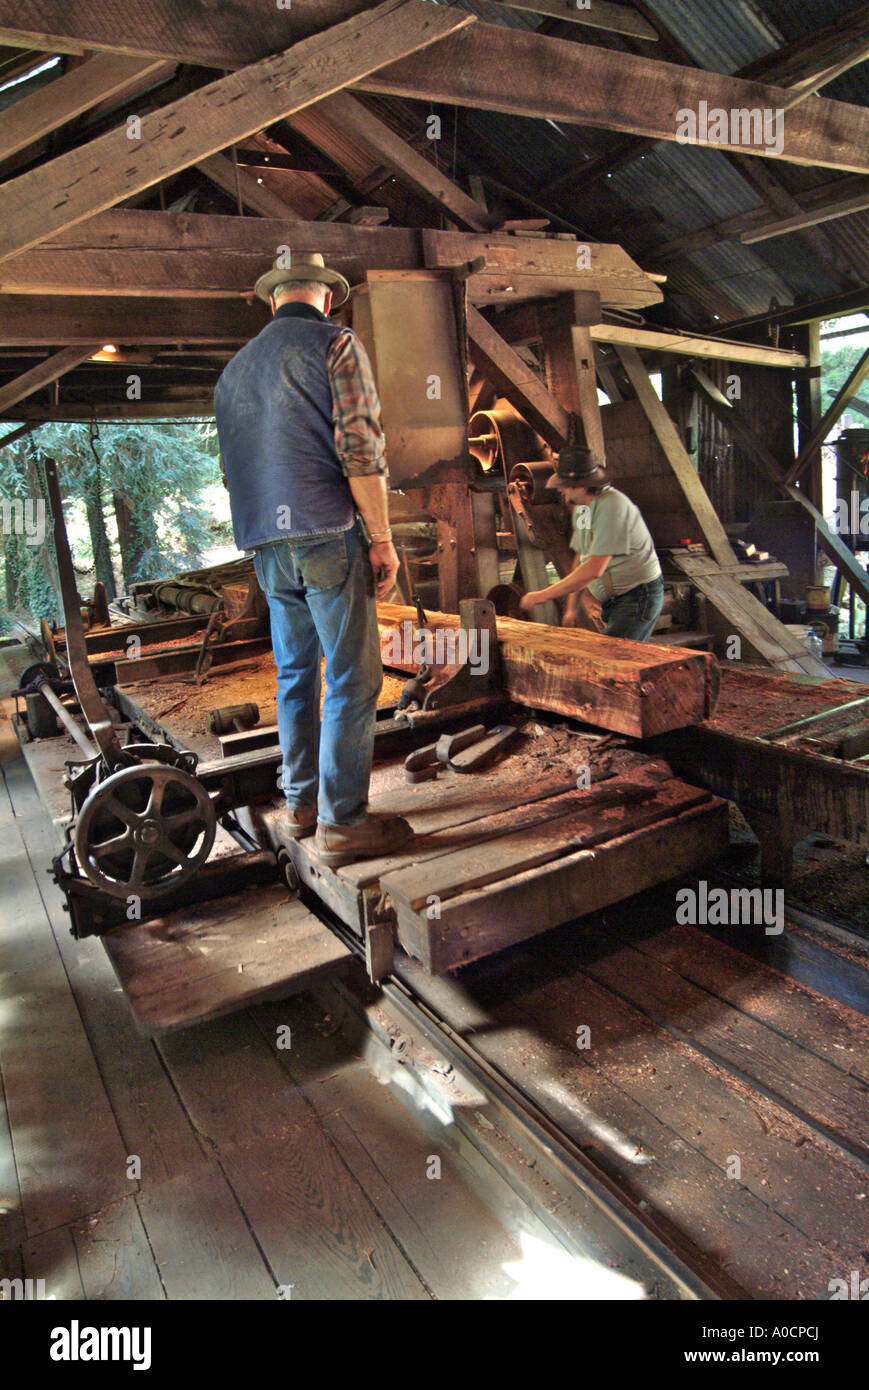 Saw mill workers begin the final trimming cut of a redwood log at an antique saw mill in Occidental California Stock Photo